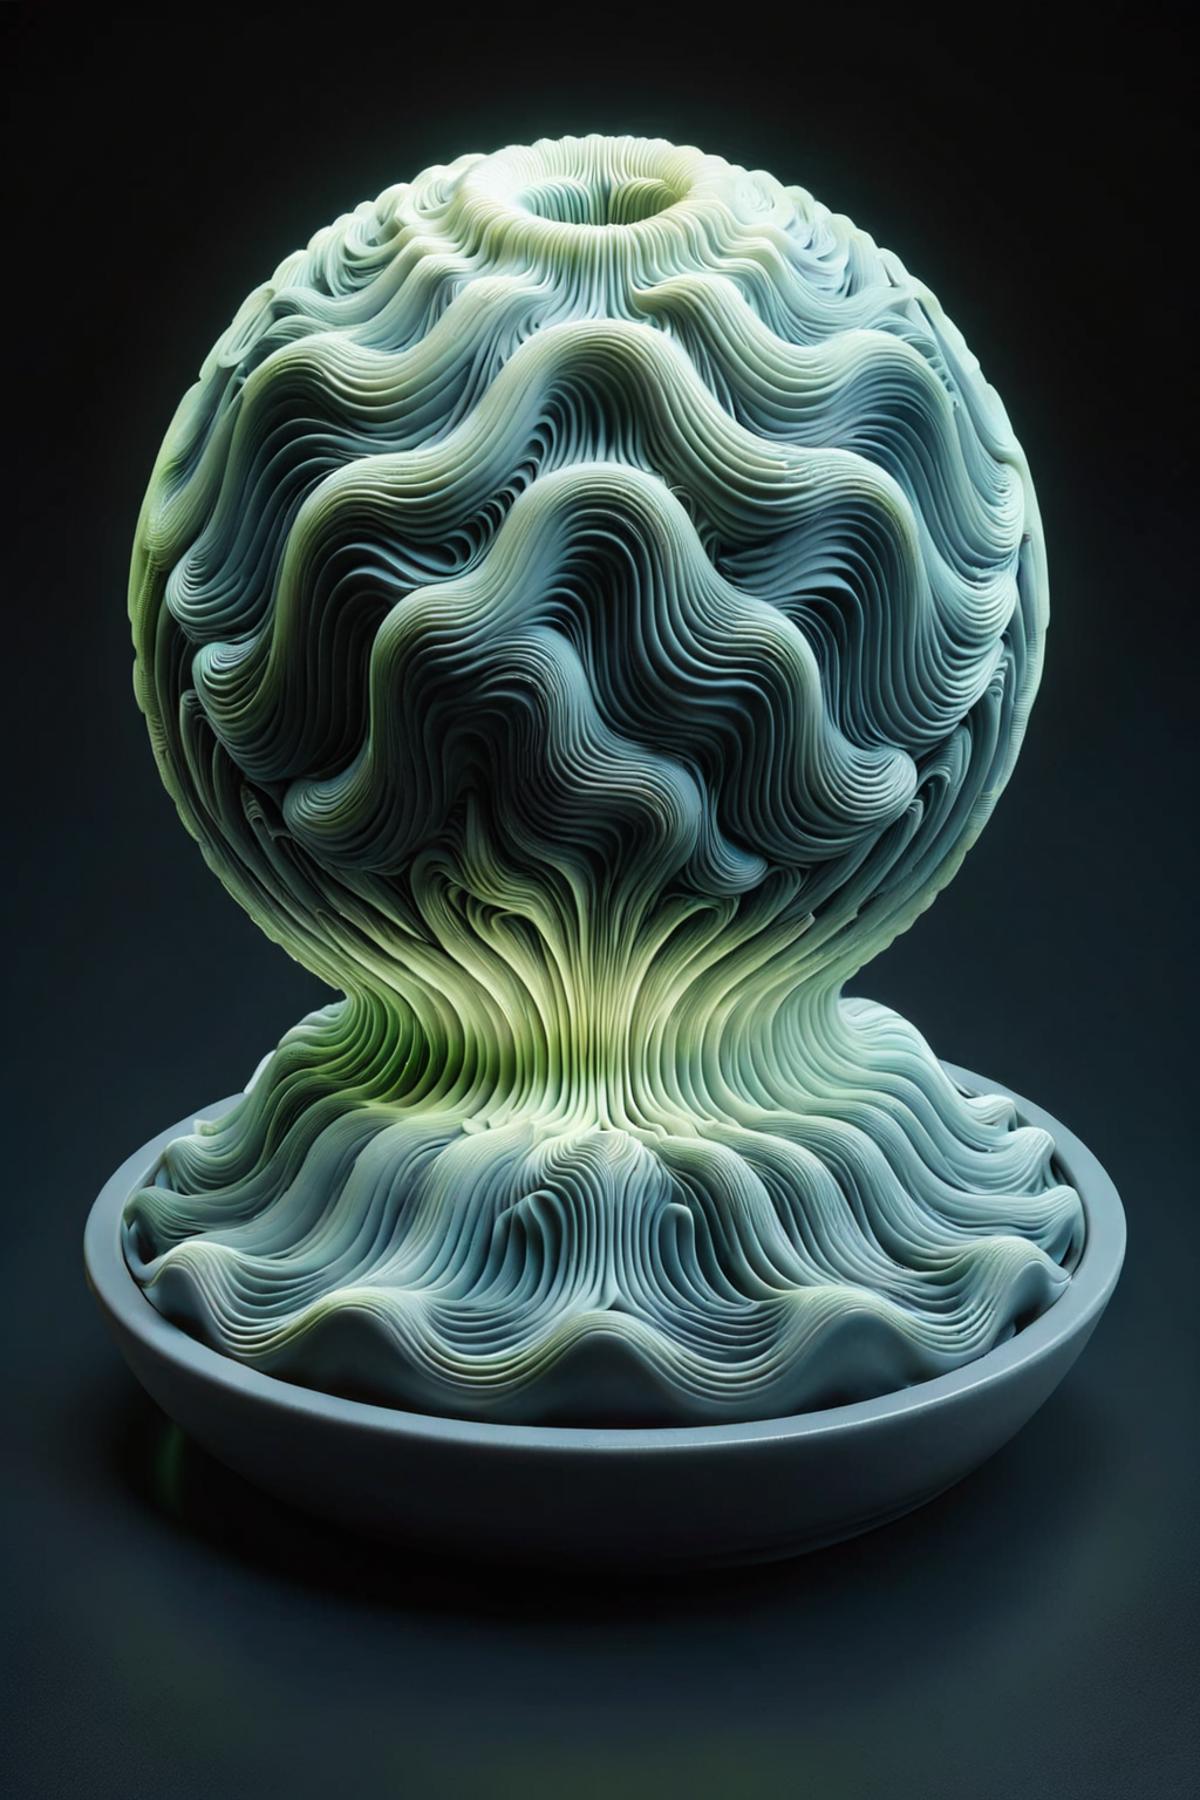 White and Green Sculpture in a Bowl